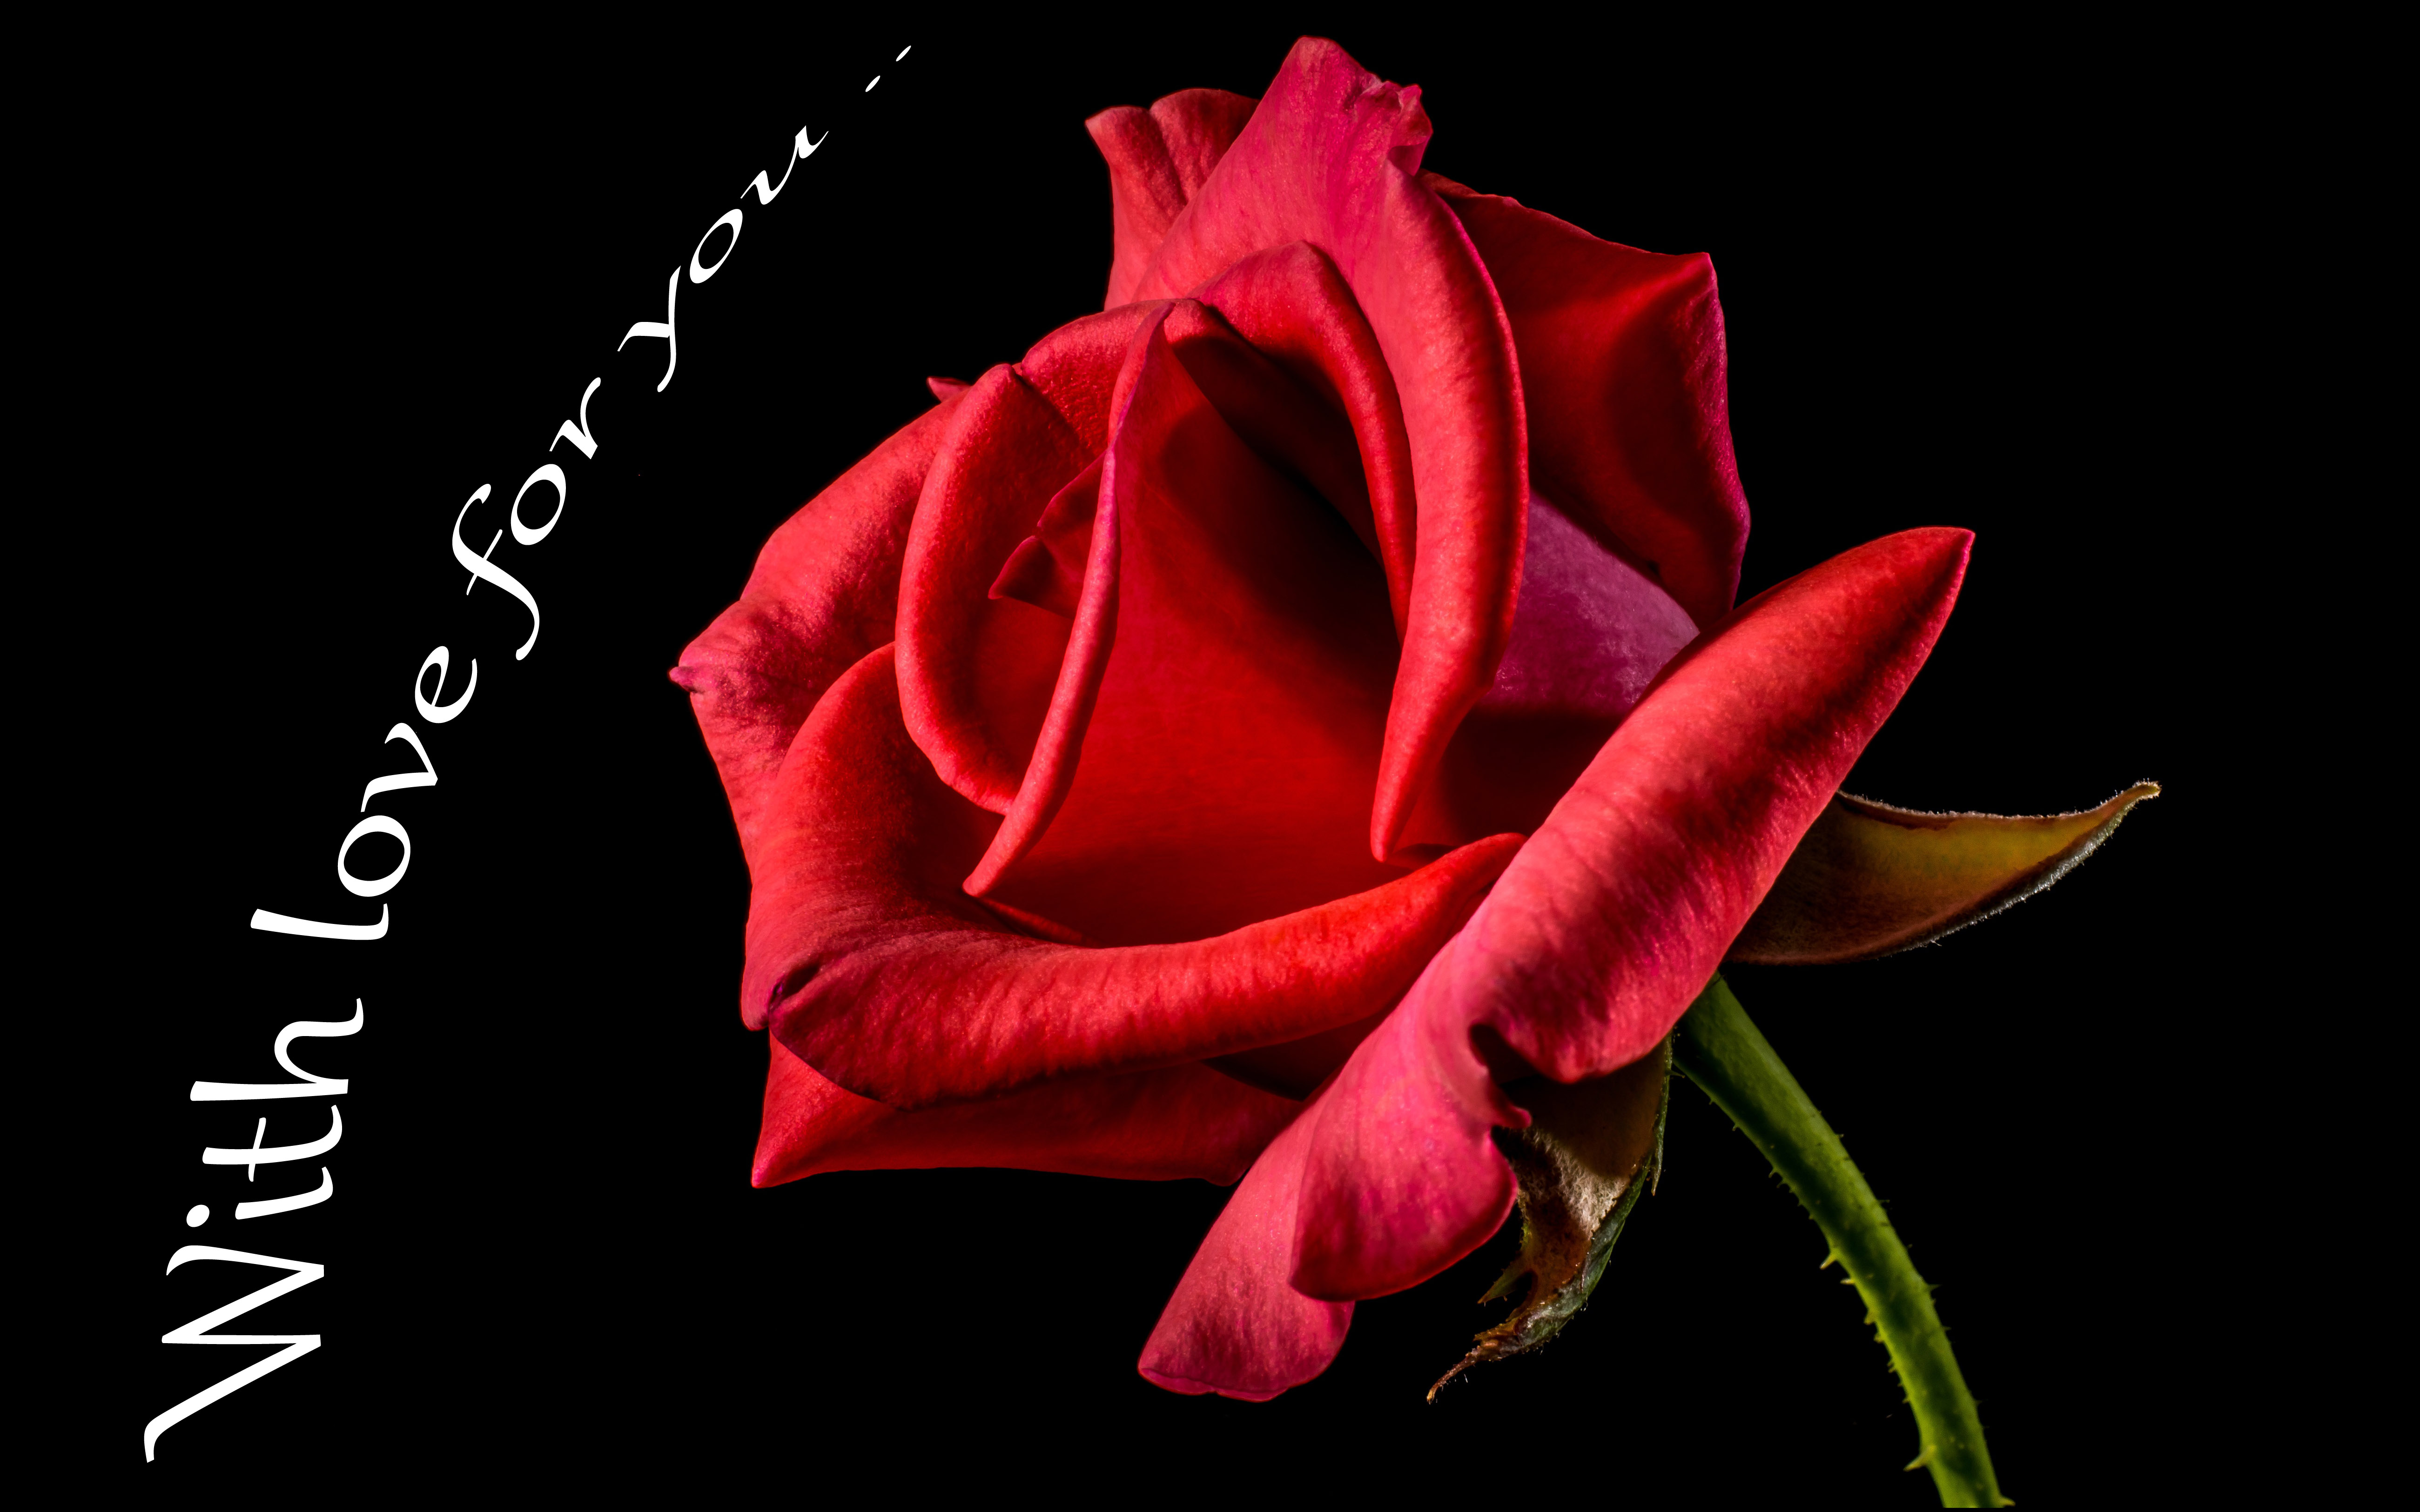 Red Roses With Love For You Wallpaper Hd : Wallpapers13.com5200 x 3250